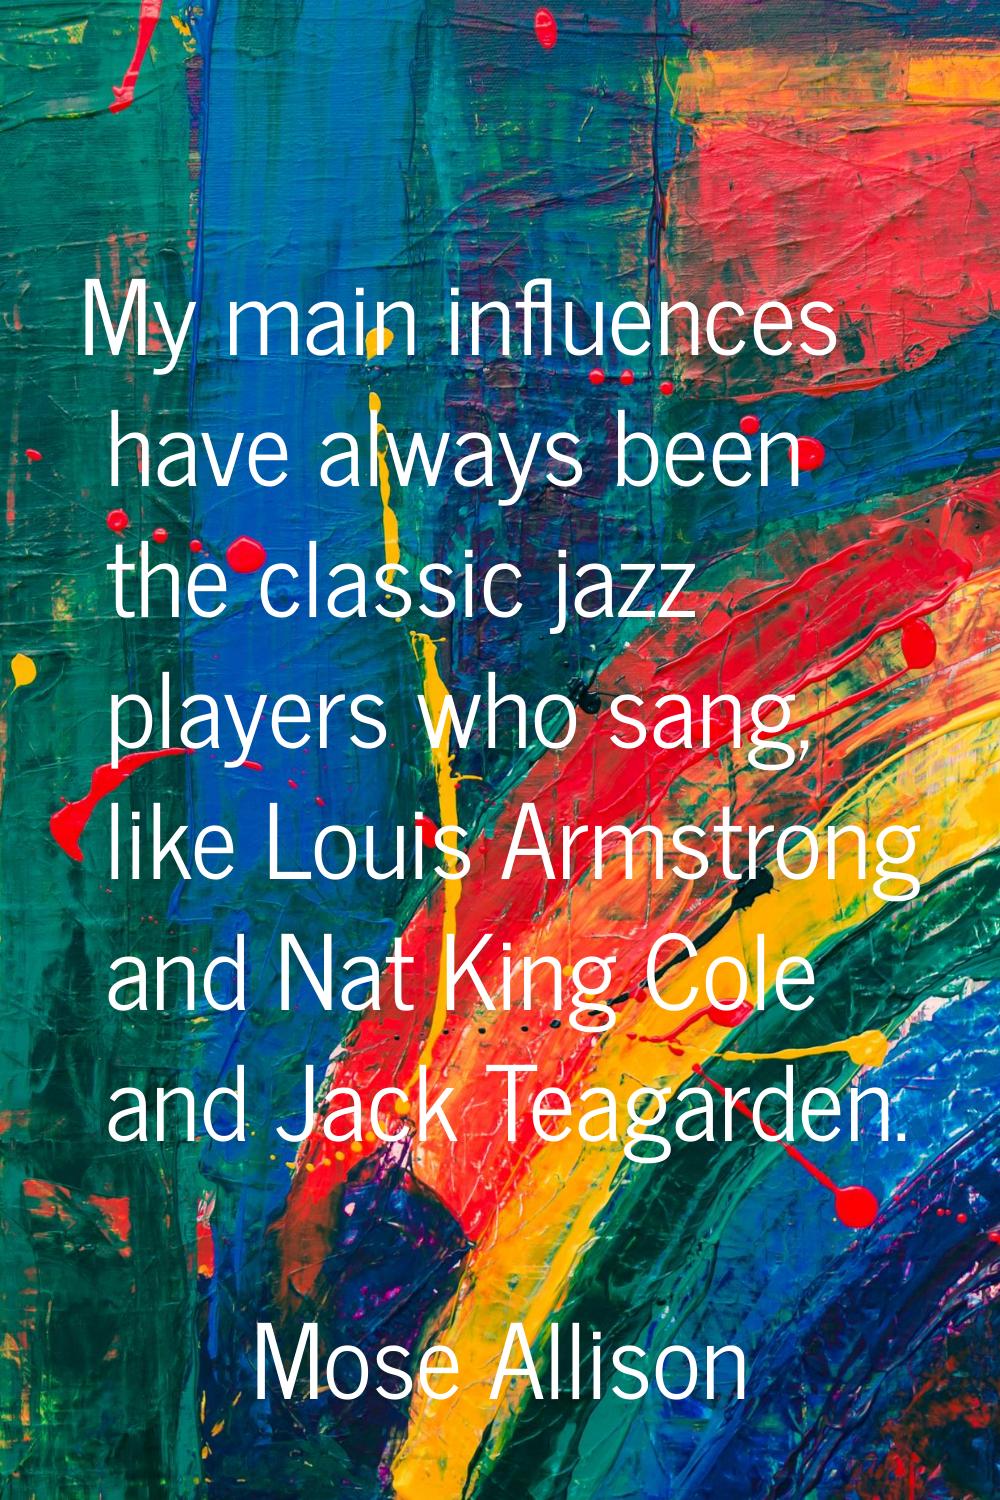 My main influences have always been the classic jazz players who sang, like Louis Armstrong and Nat